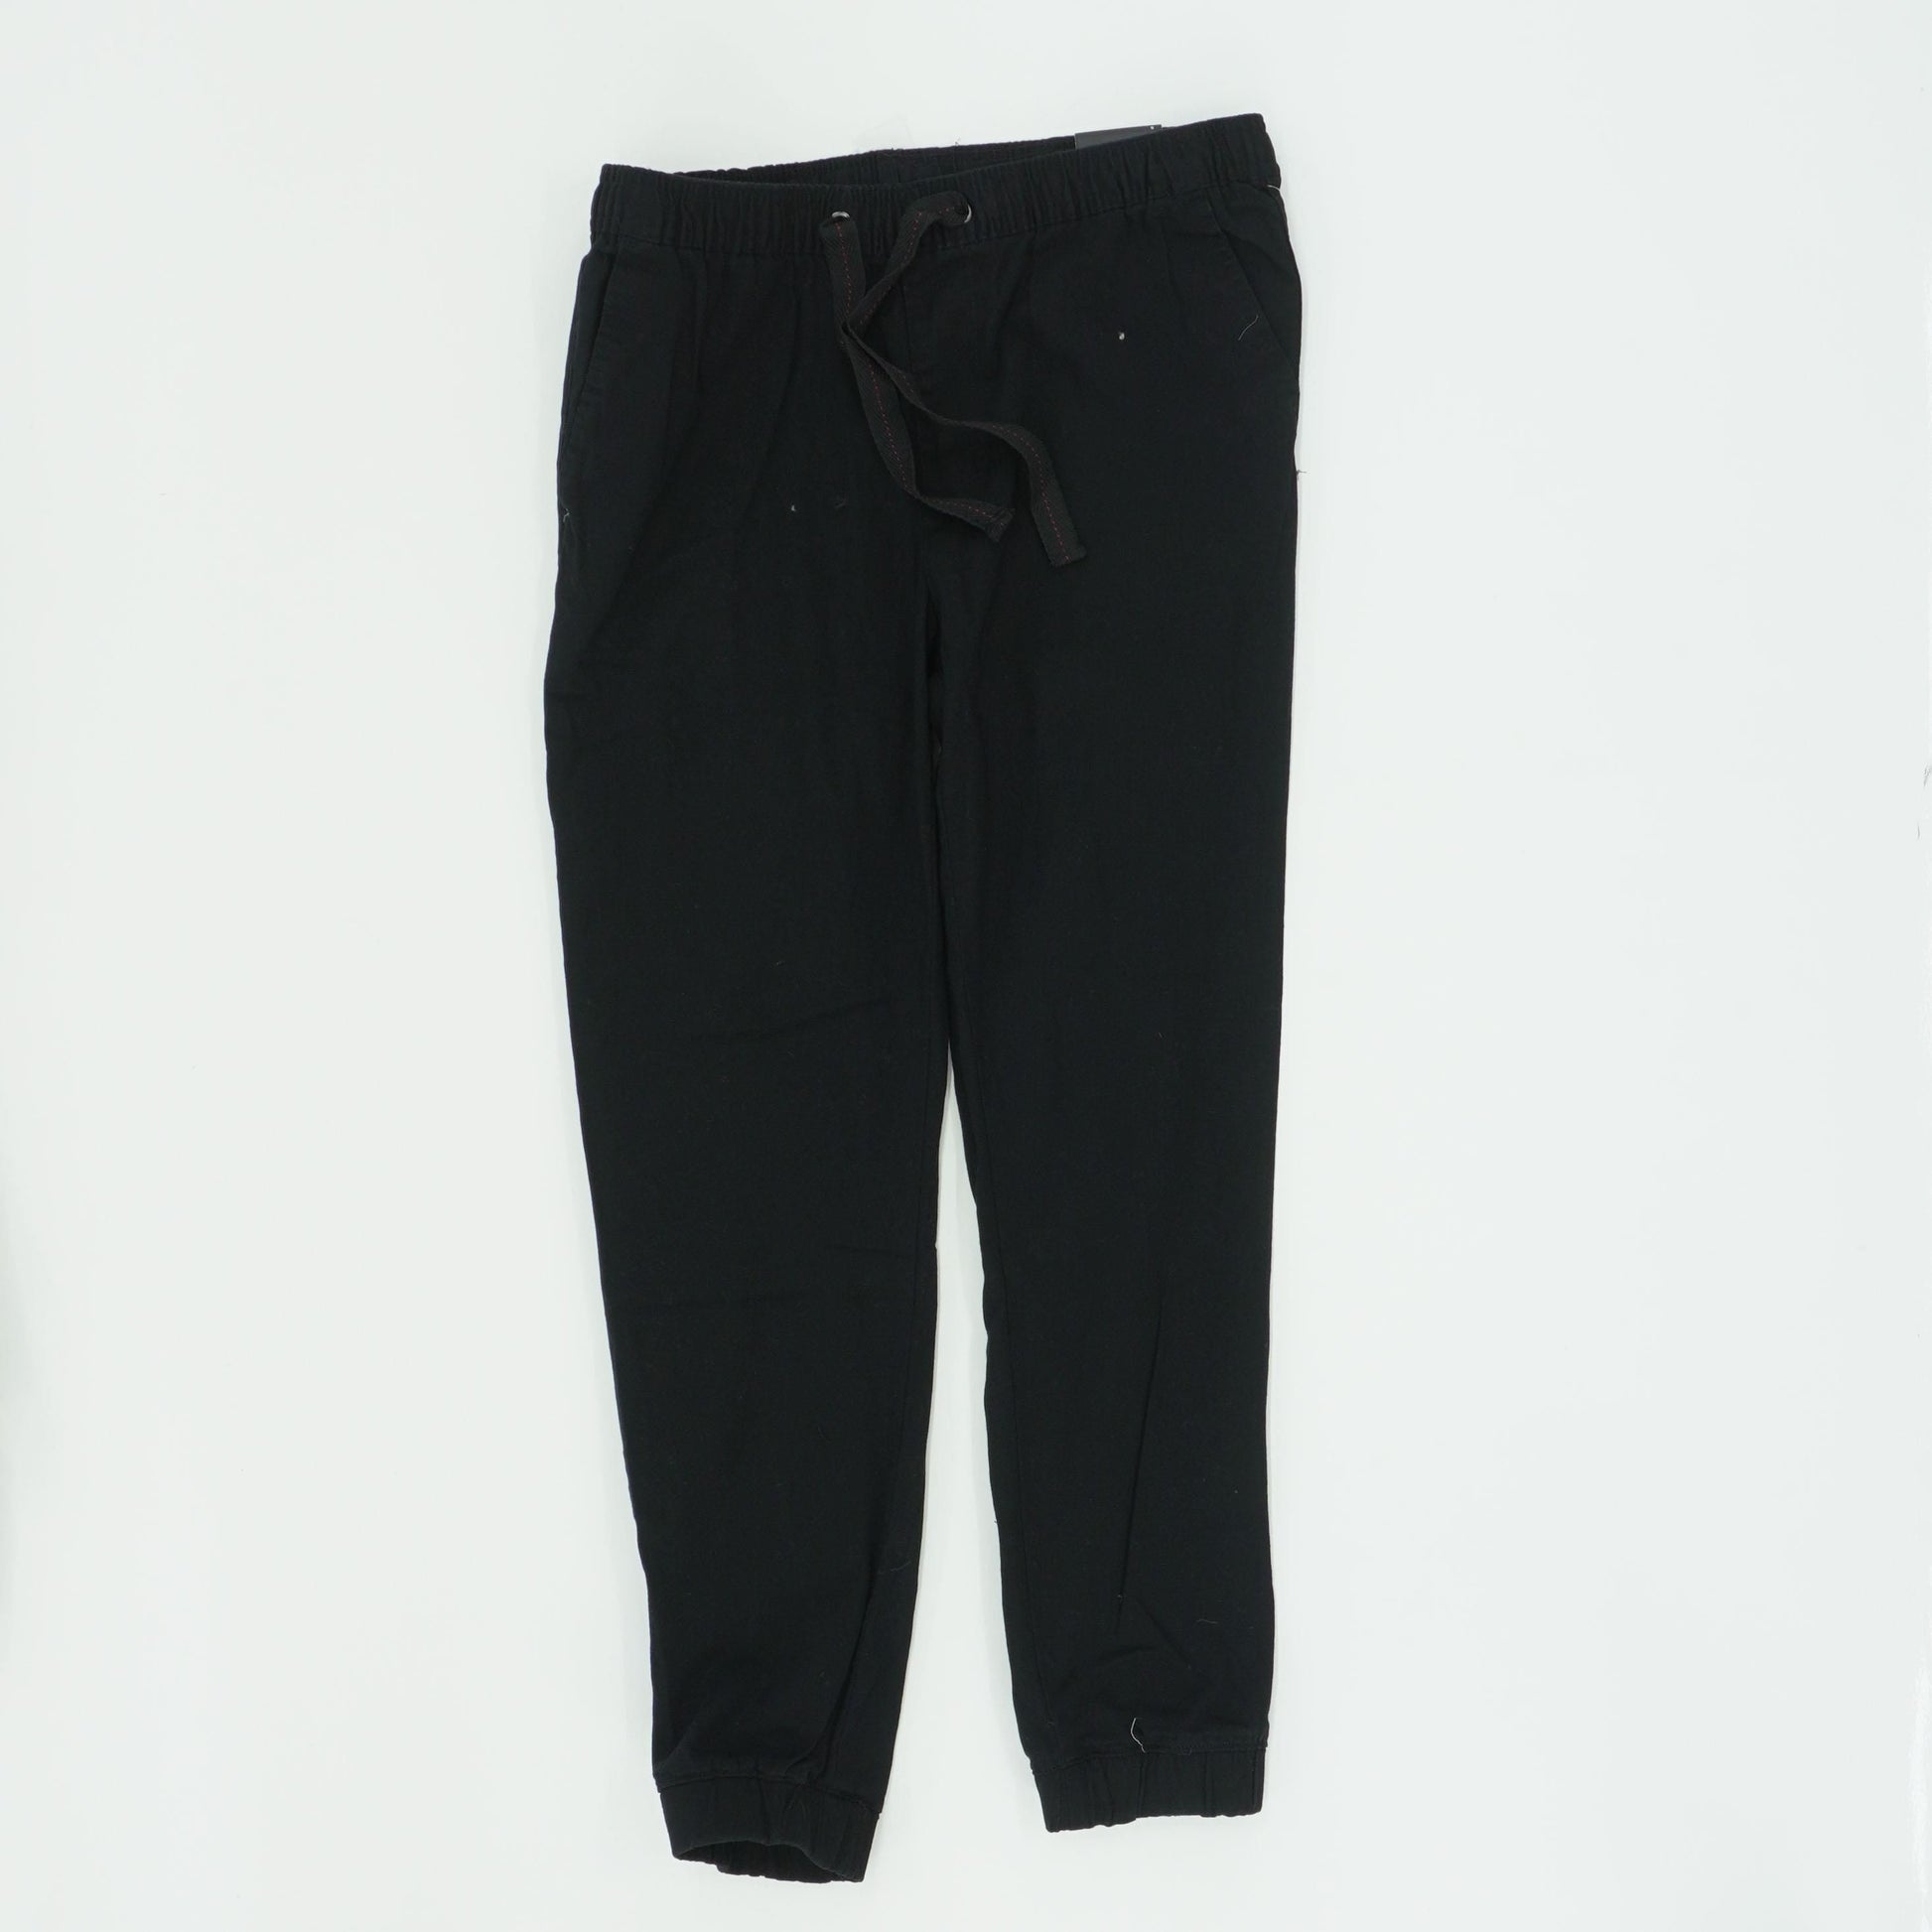 Black Solid Joggers Pants – Unclaimed Baggage